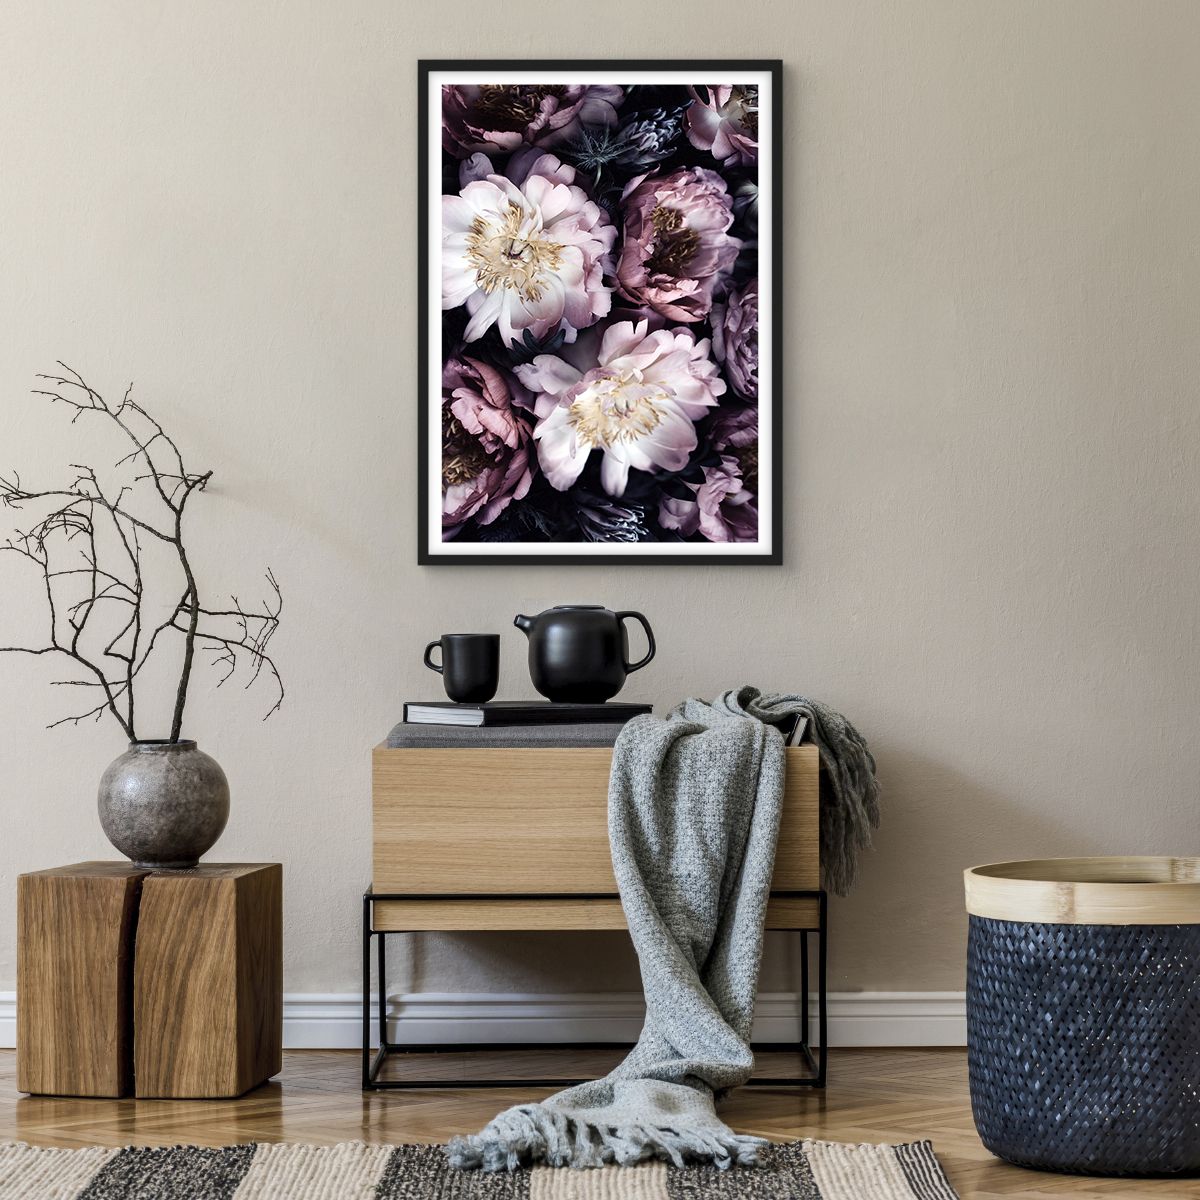 Poster in cornice nera Peonie, Poster in cornice nera Fiori, Poster in cornice nera Mazzo Di Fiori, Poster in cornice nera Giardino, Poster in cornice nera Vintage ▾